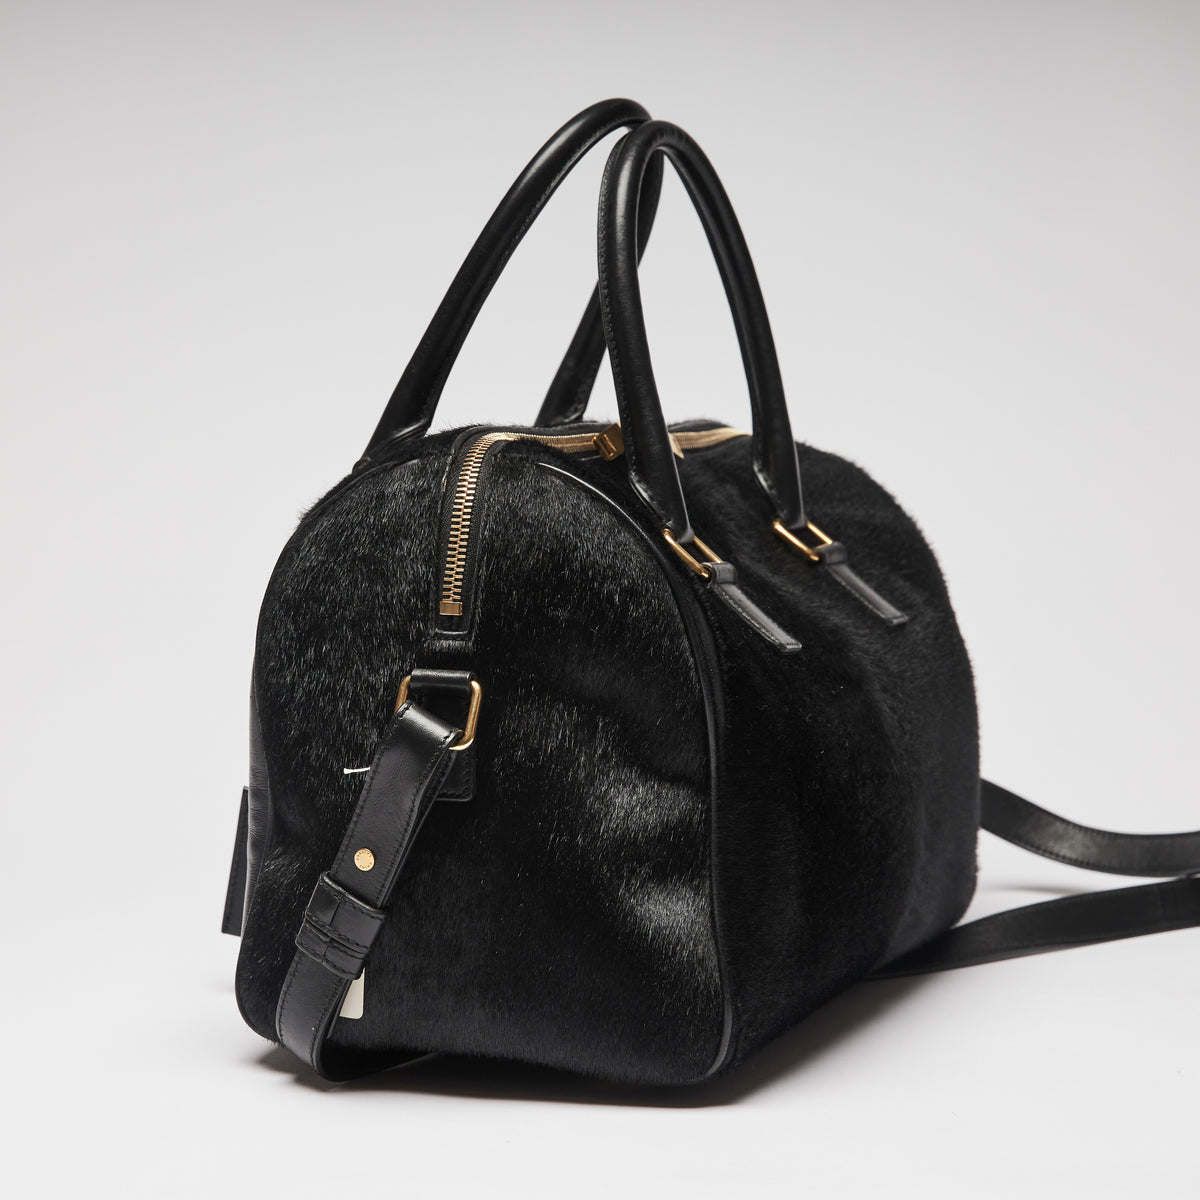 Pre-Loved Black Leather and Pony Hair Duffle Bag with Removable Shoulder Strap. (side)